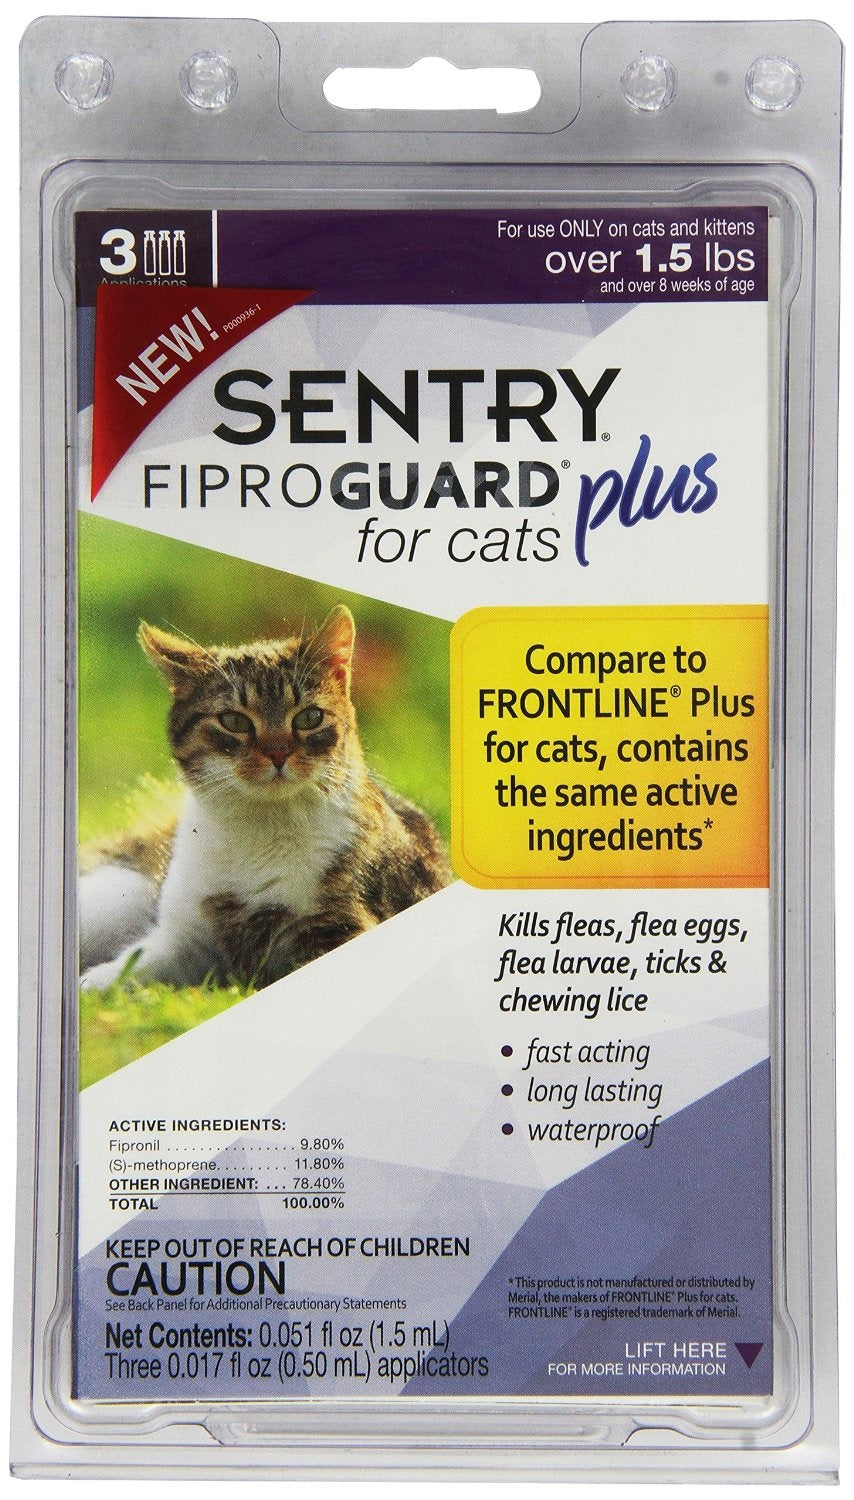 Sentry 03164 Fiproguard Plus for Cats & Kittens Topical Flea & Tick Treatment, 1.5 Lbs